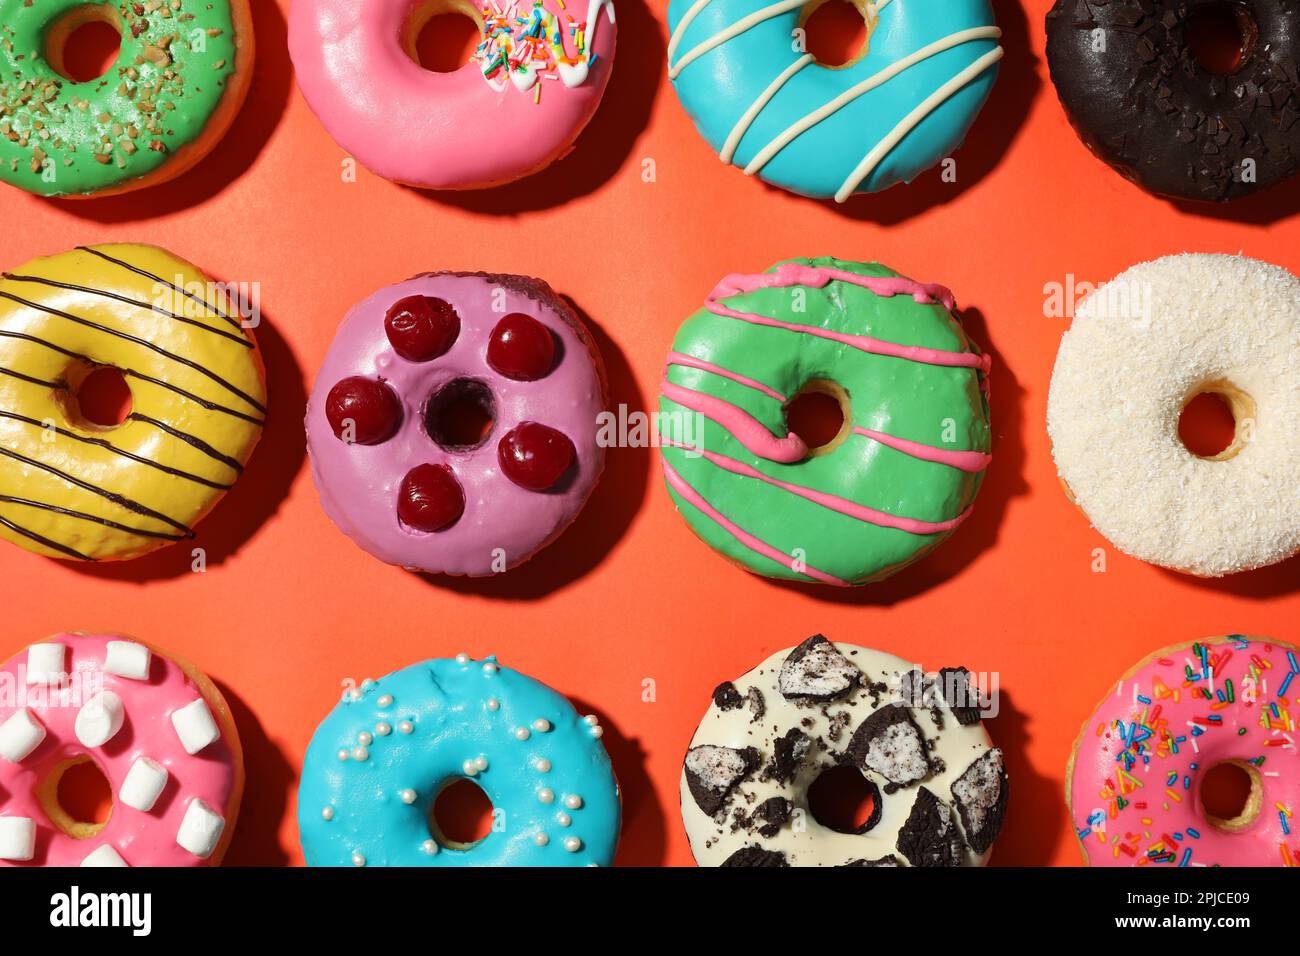 Sweet tasty glazed donuts on coral background, flat lay Stock Photo